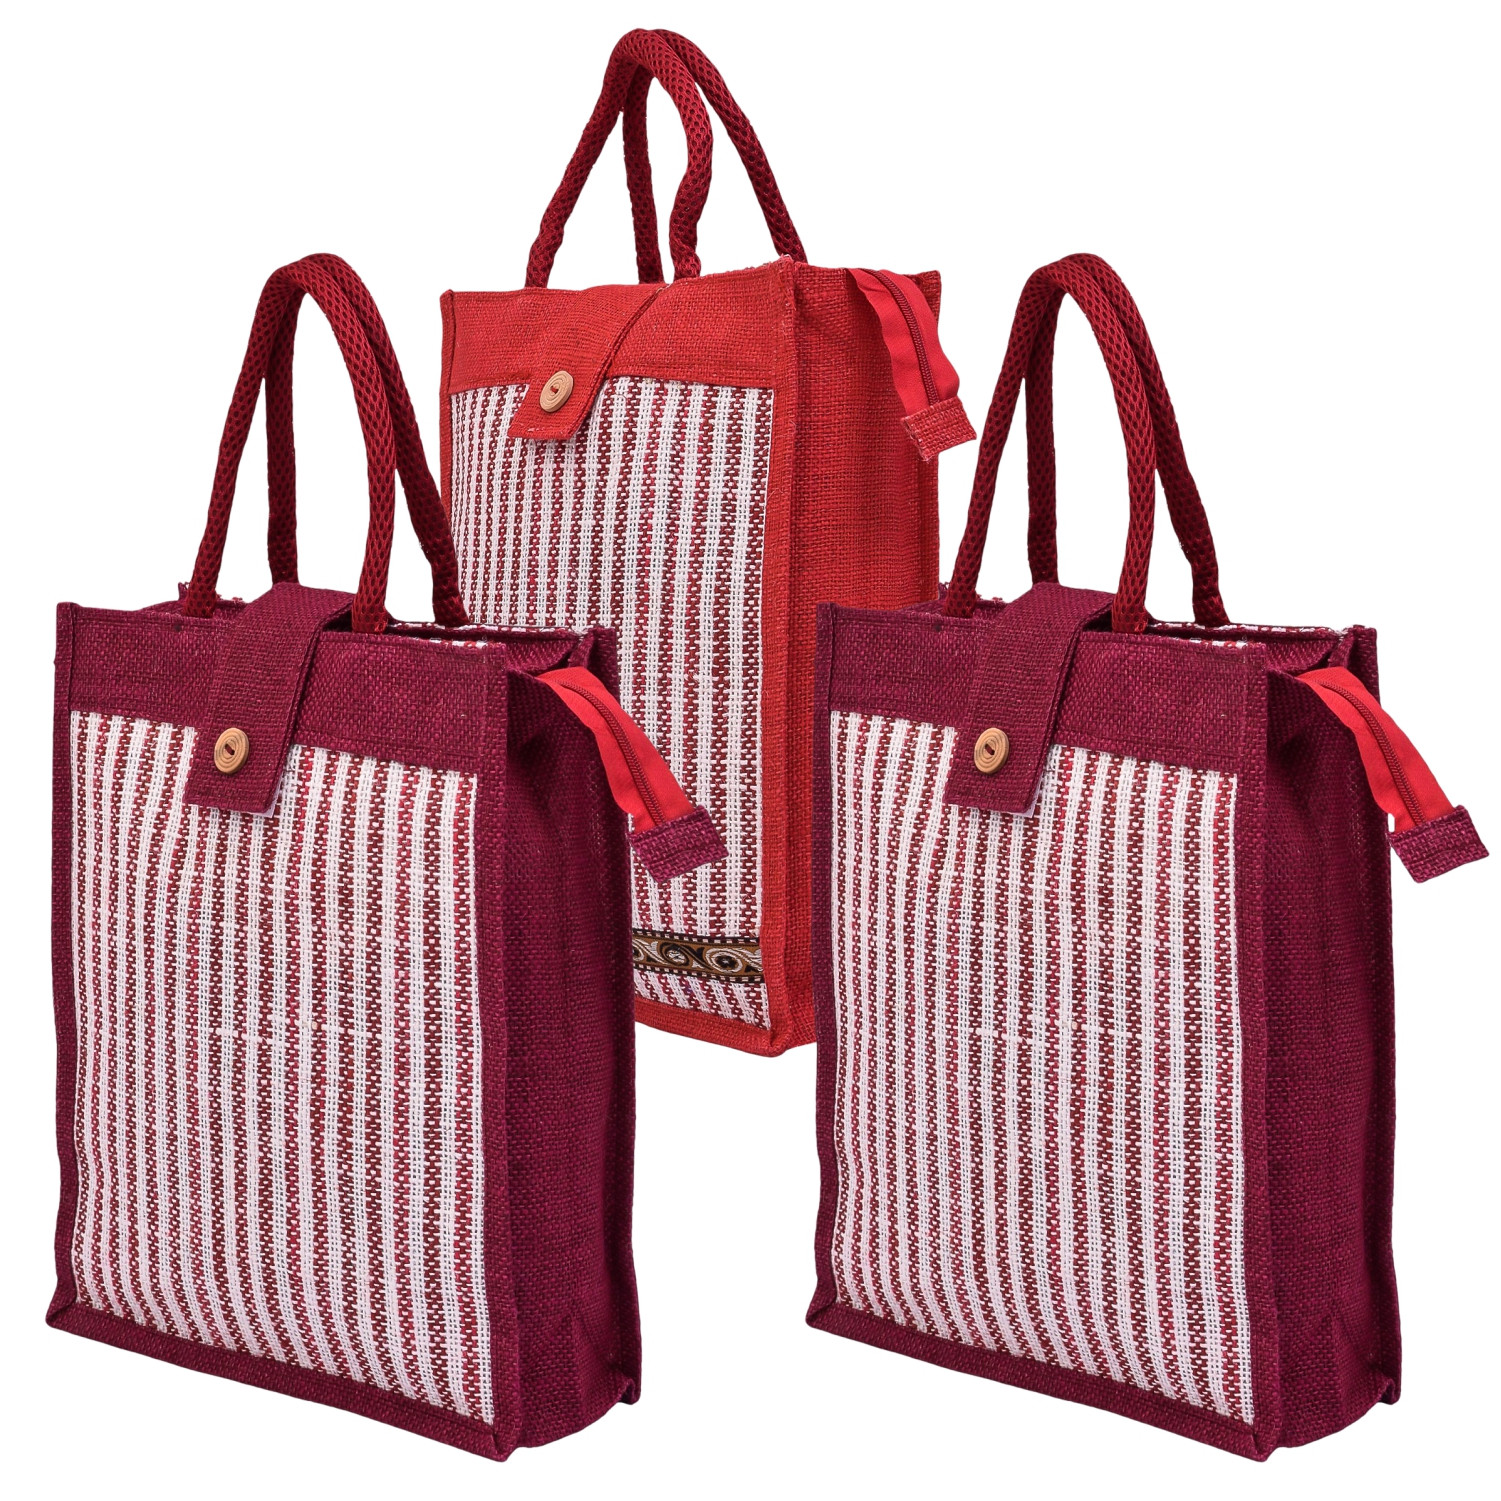 Kuber Industries Shopping Bag | Jute Carry Bag | Zipper Grocery Bag with Handle | Vegetable Bag with Top Flap | Reusable Shopping Bag | Lining-Grocery Bag | Medium | Pack of 3 | Multi